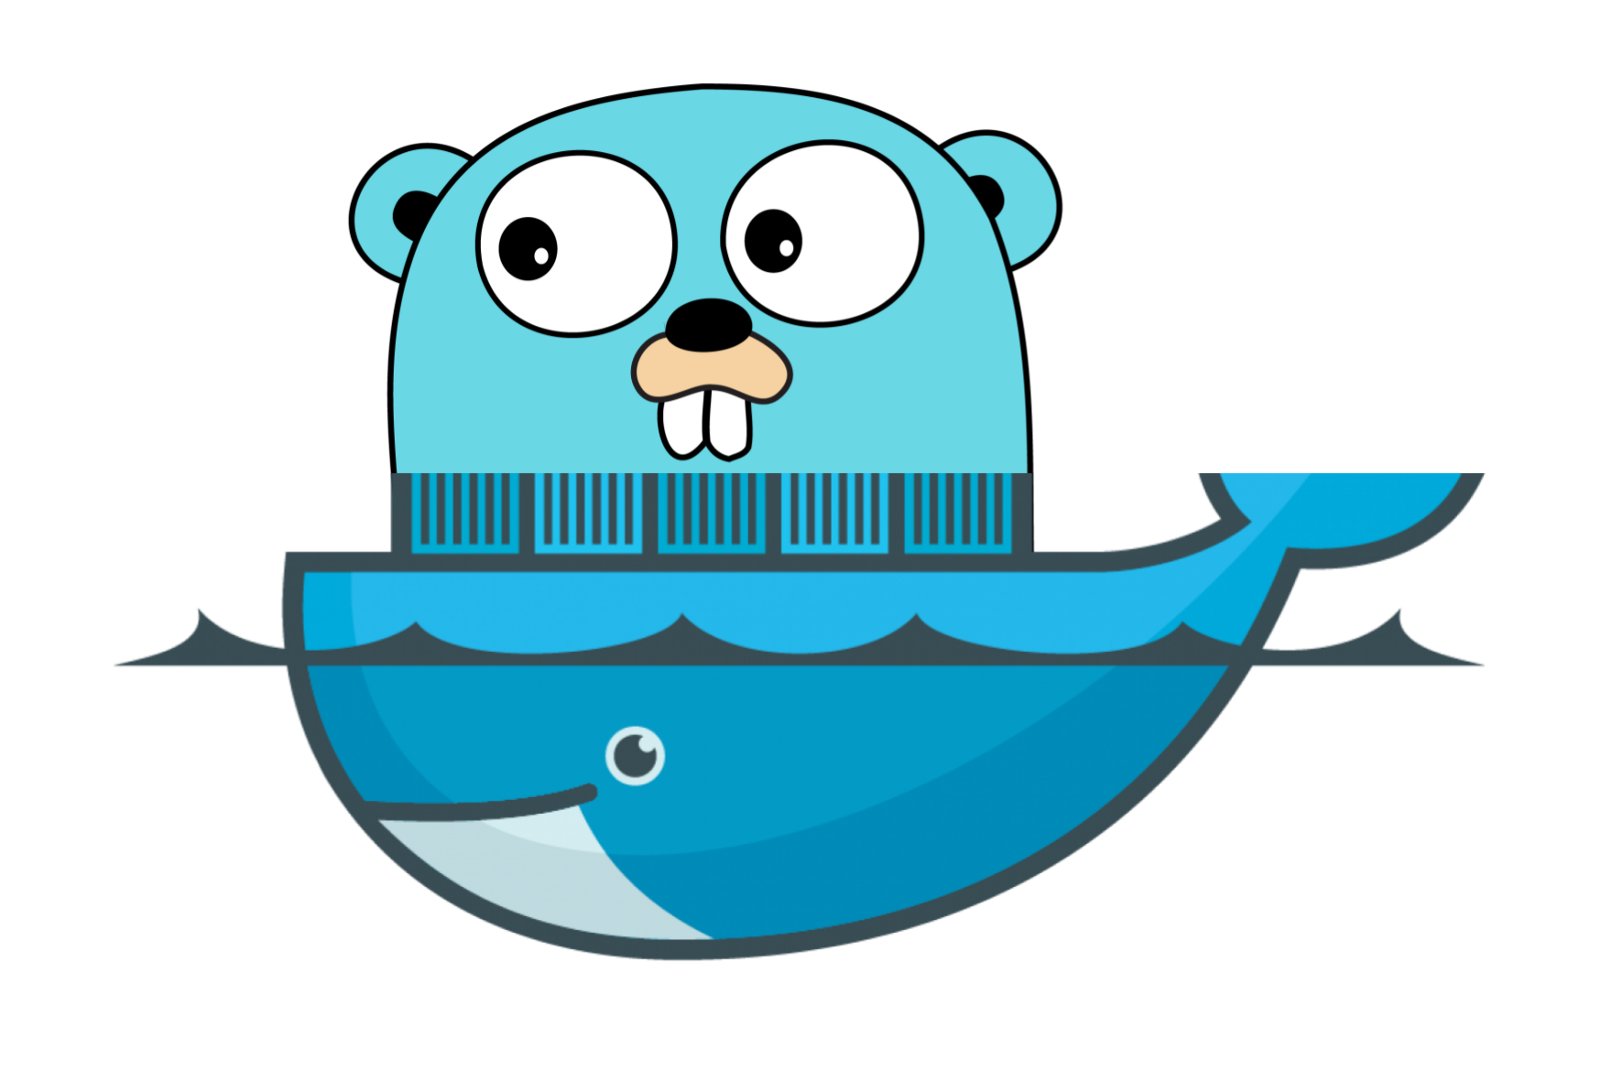 Gopher and Docker